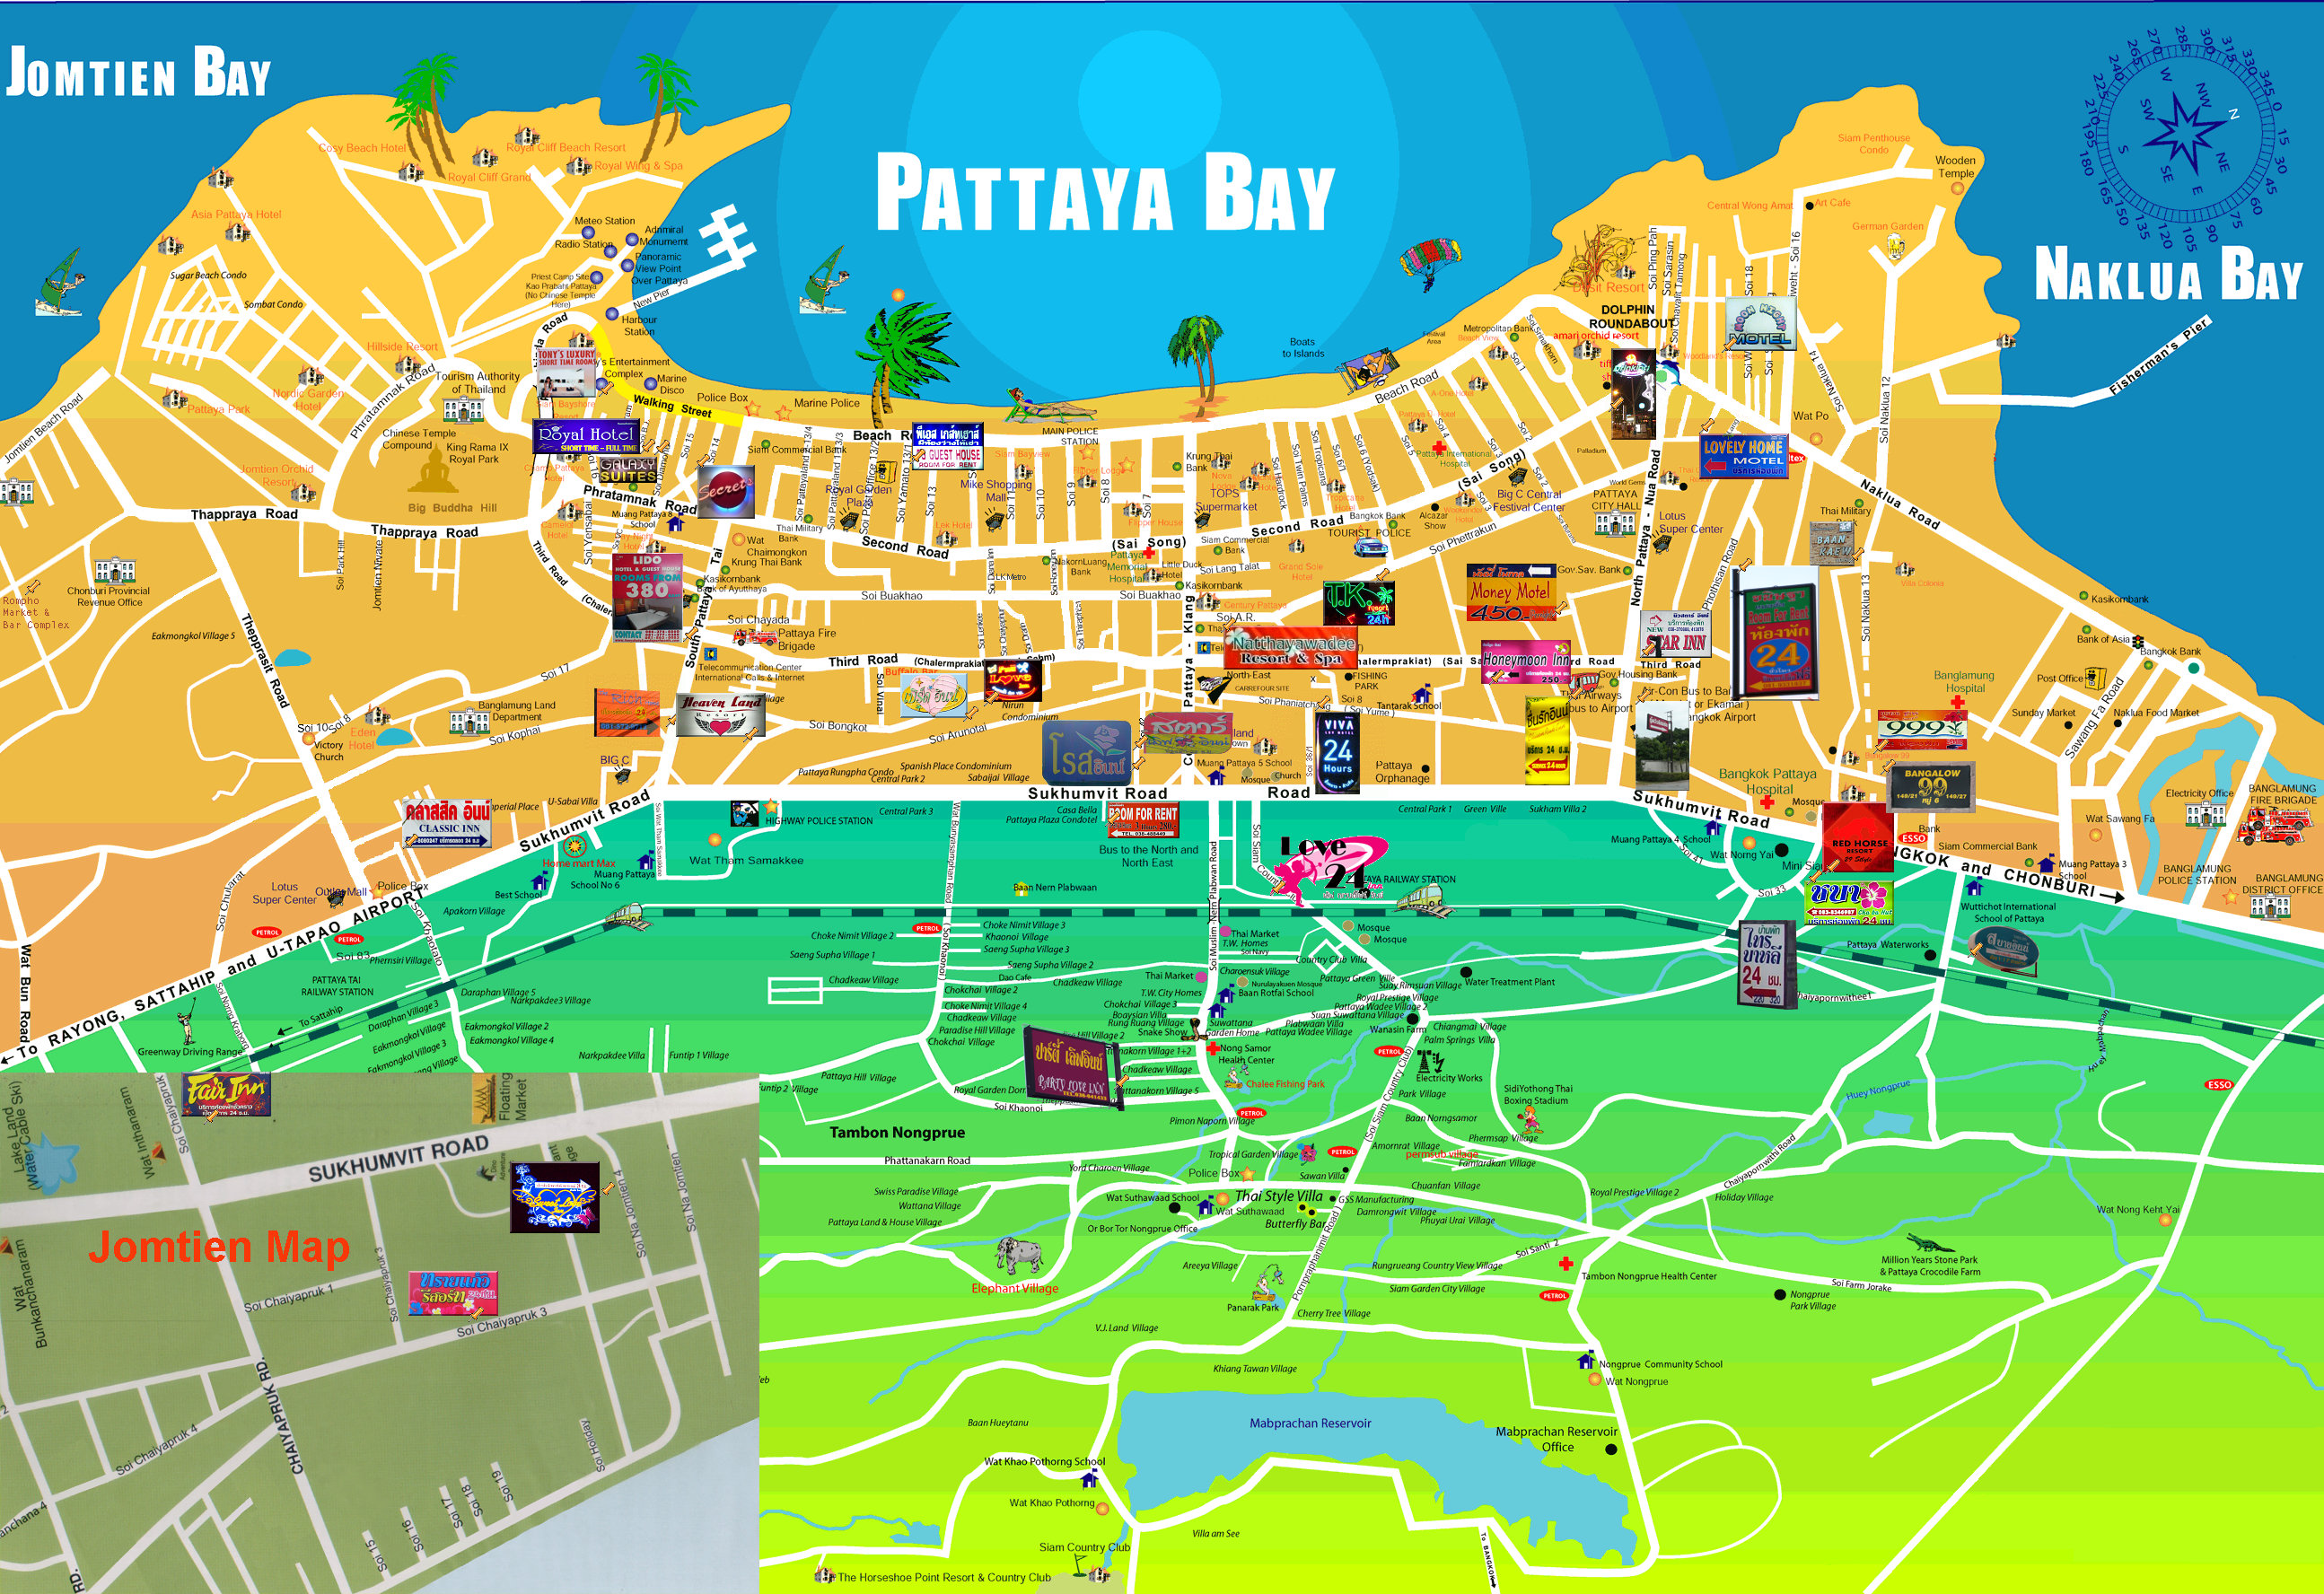 Pattaya Street Map - Printed Courtesy of PAPPA Co., Ltd. All Right Reserved. www.officialthailandinfo.com